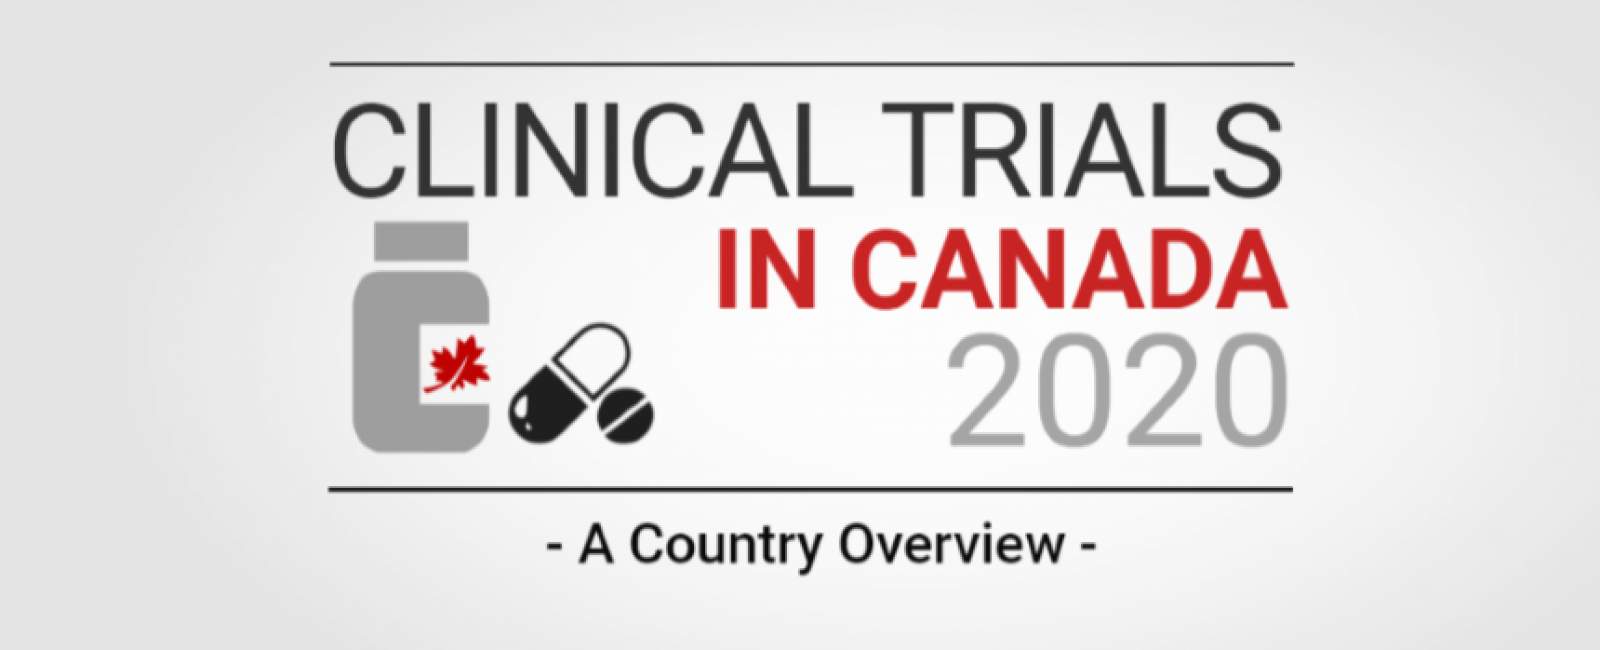 2020 Clinical Trials in Canada - An Overview